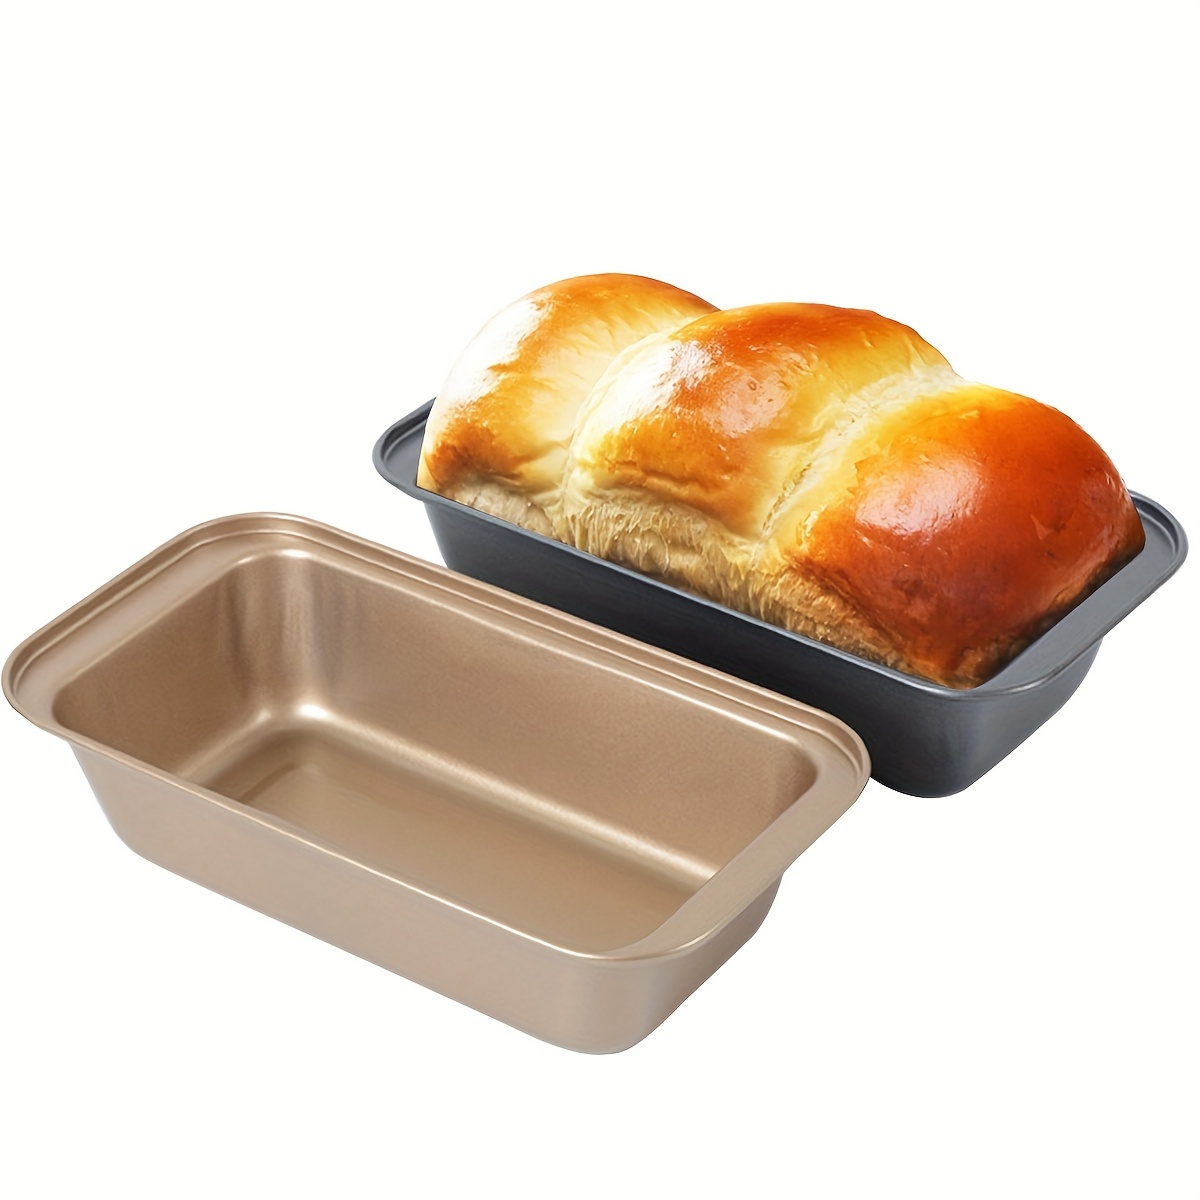 

1pc, Non-stick Loaf Pan - Perfect For Baking Bread And Other Baked Goods - Oven Safe And Easy To Clean - Essential Kitchen Gadget And Home Kitchen Item